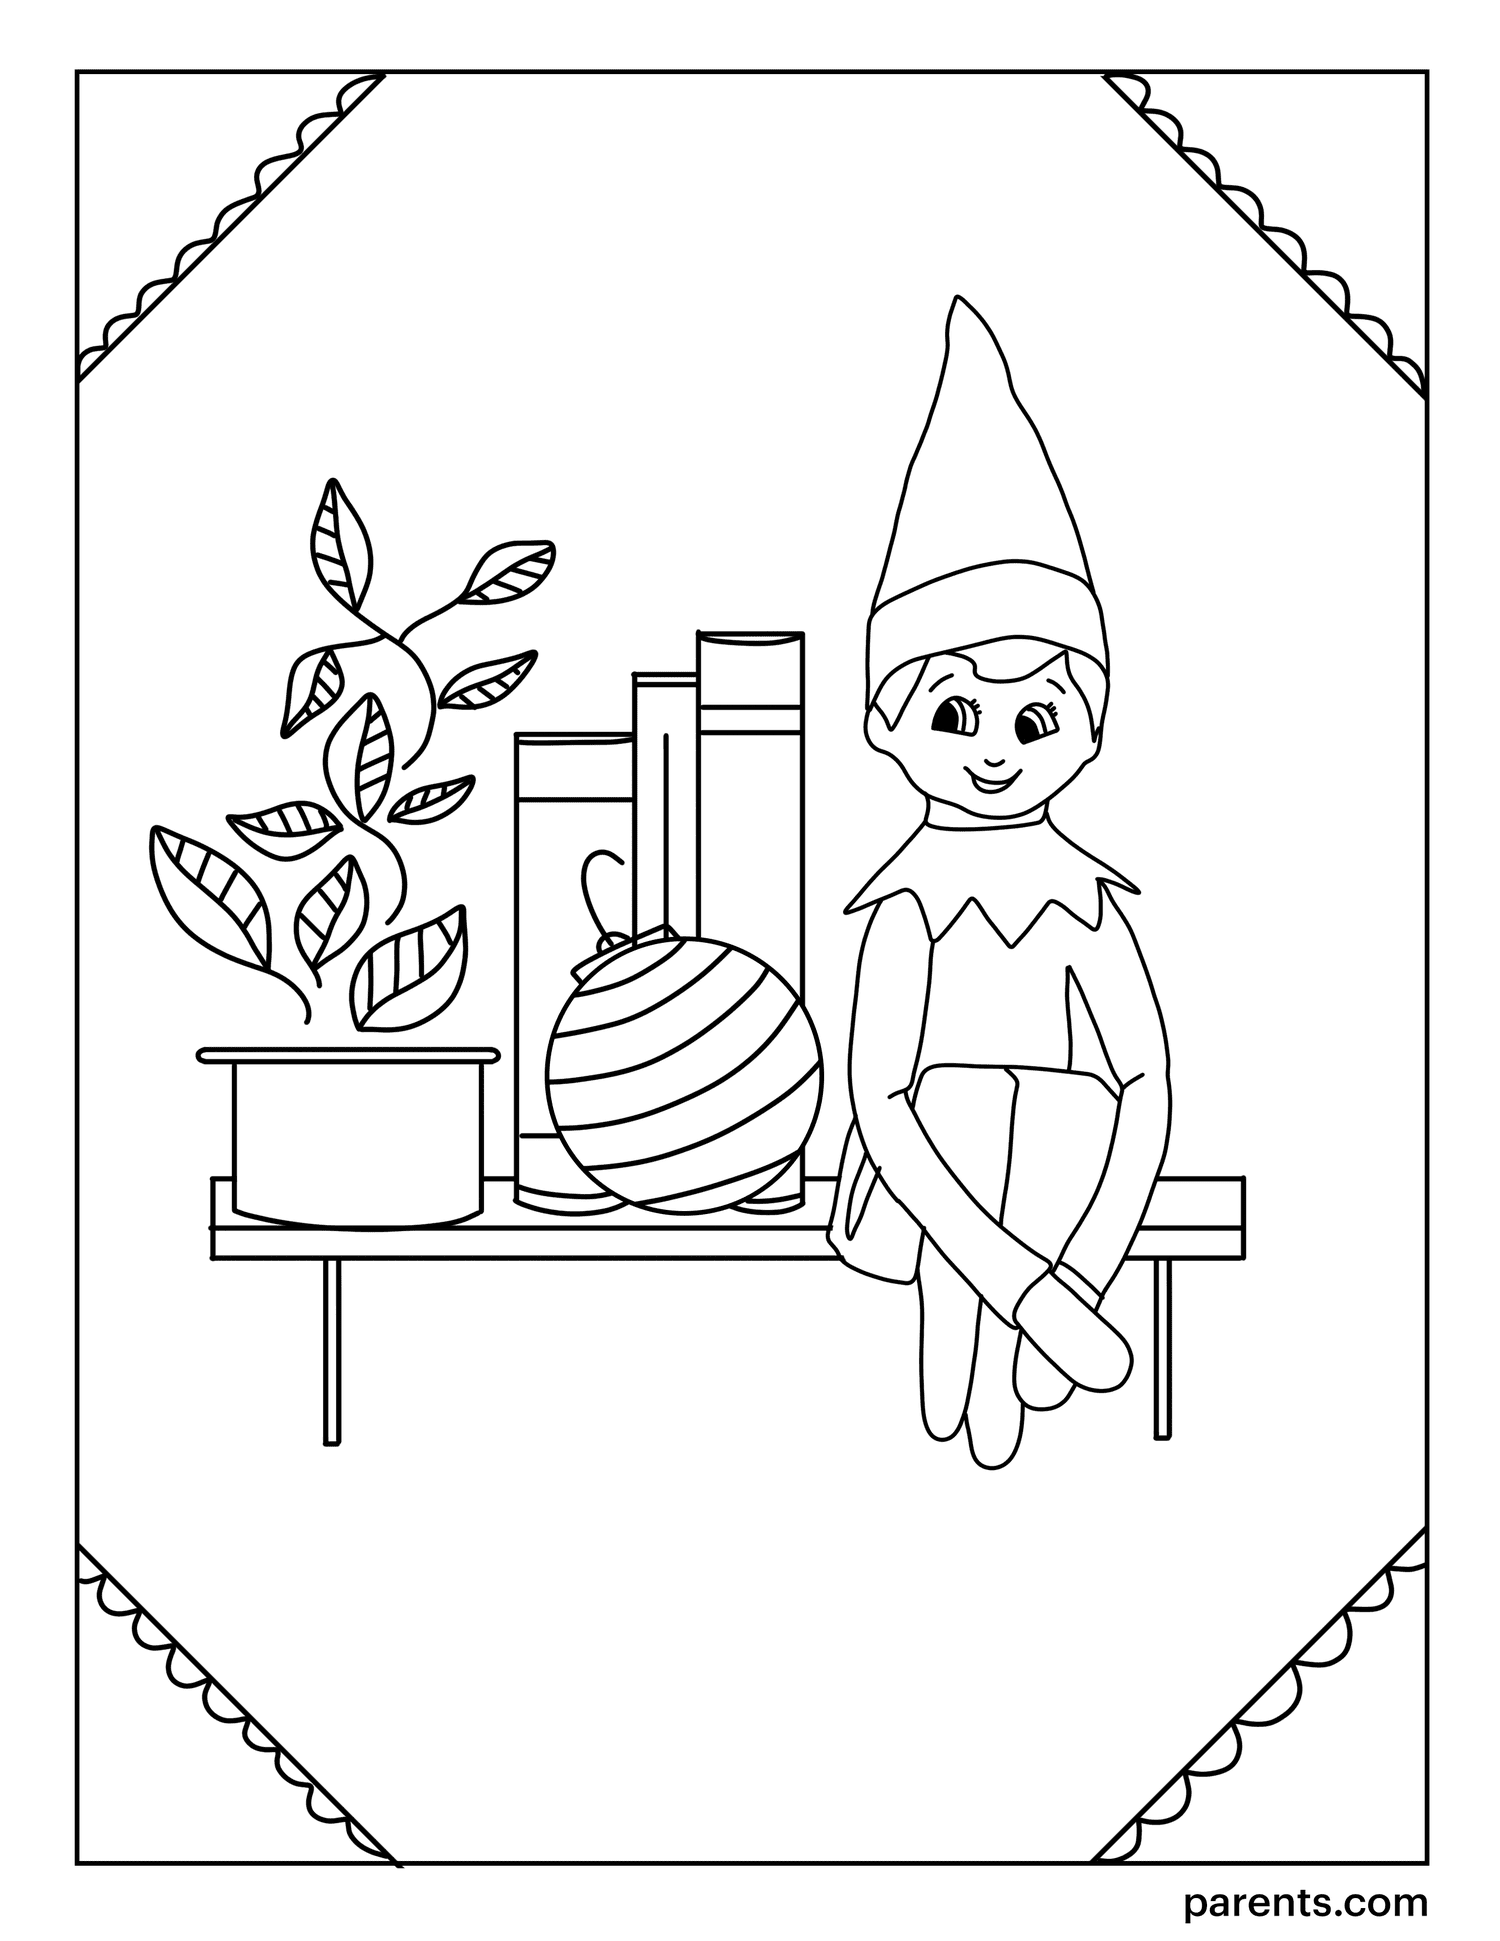 7 Elf on the Shelf Inspired Coloring Pages to Get Kids Excited for